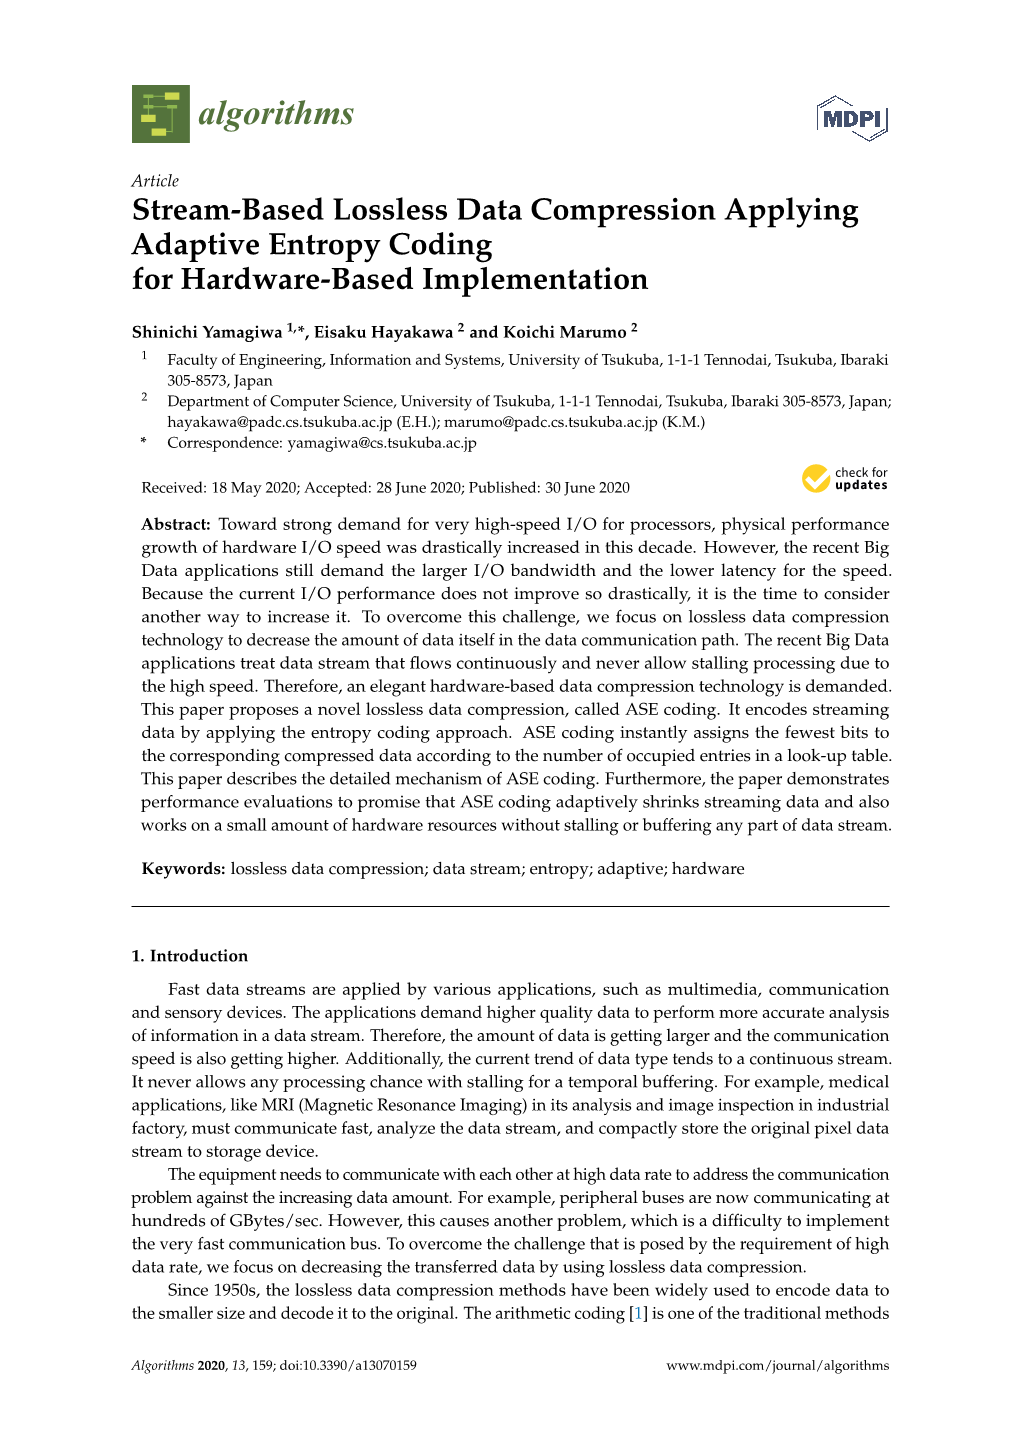 Stream-Based Lossless Data Compression Applying Adaptive Entropy Coding for Hardware-Based Implementation